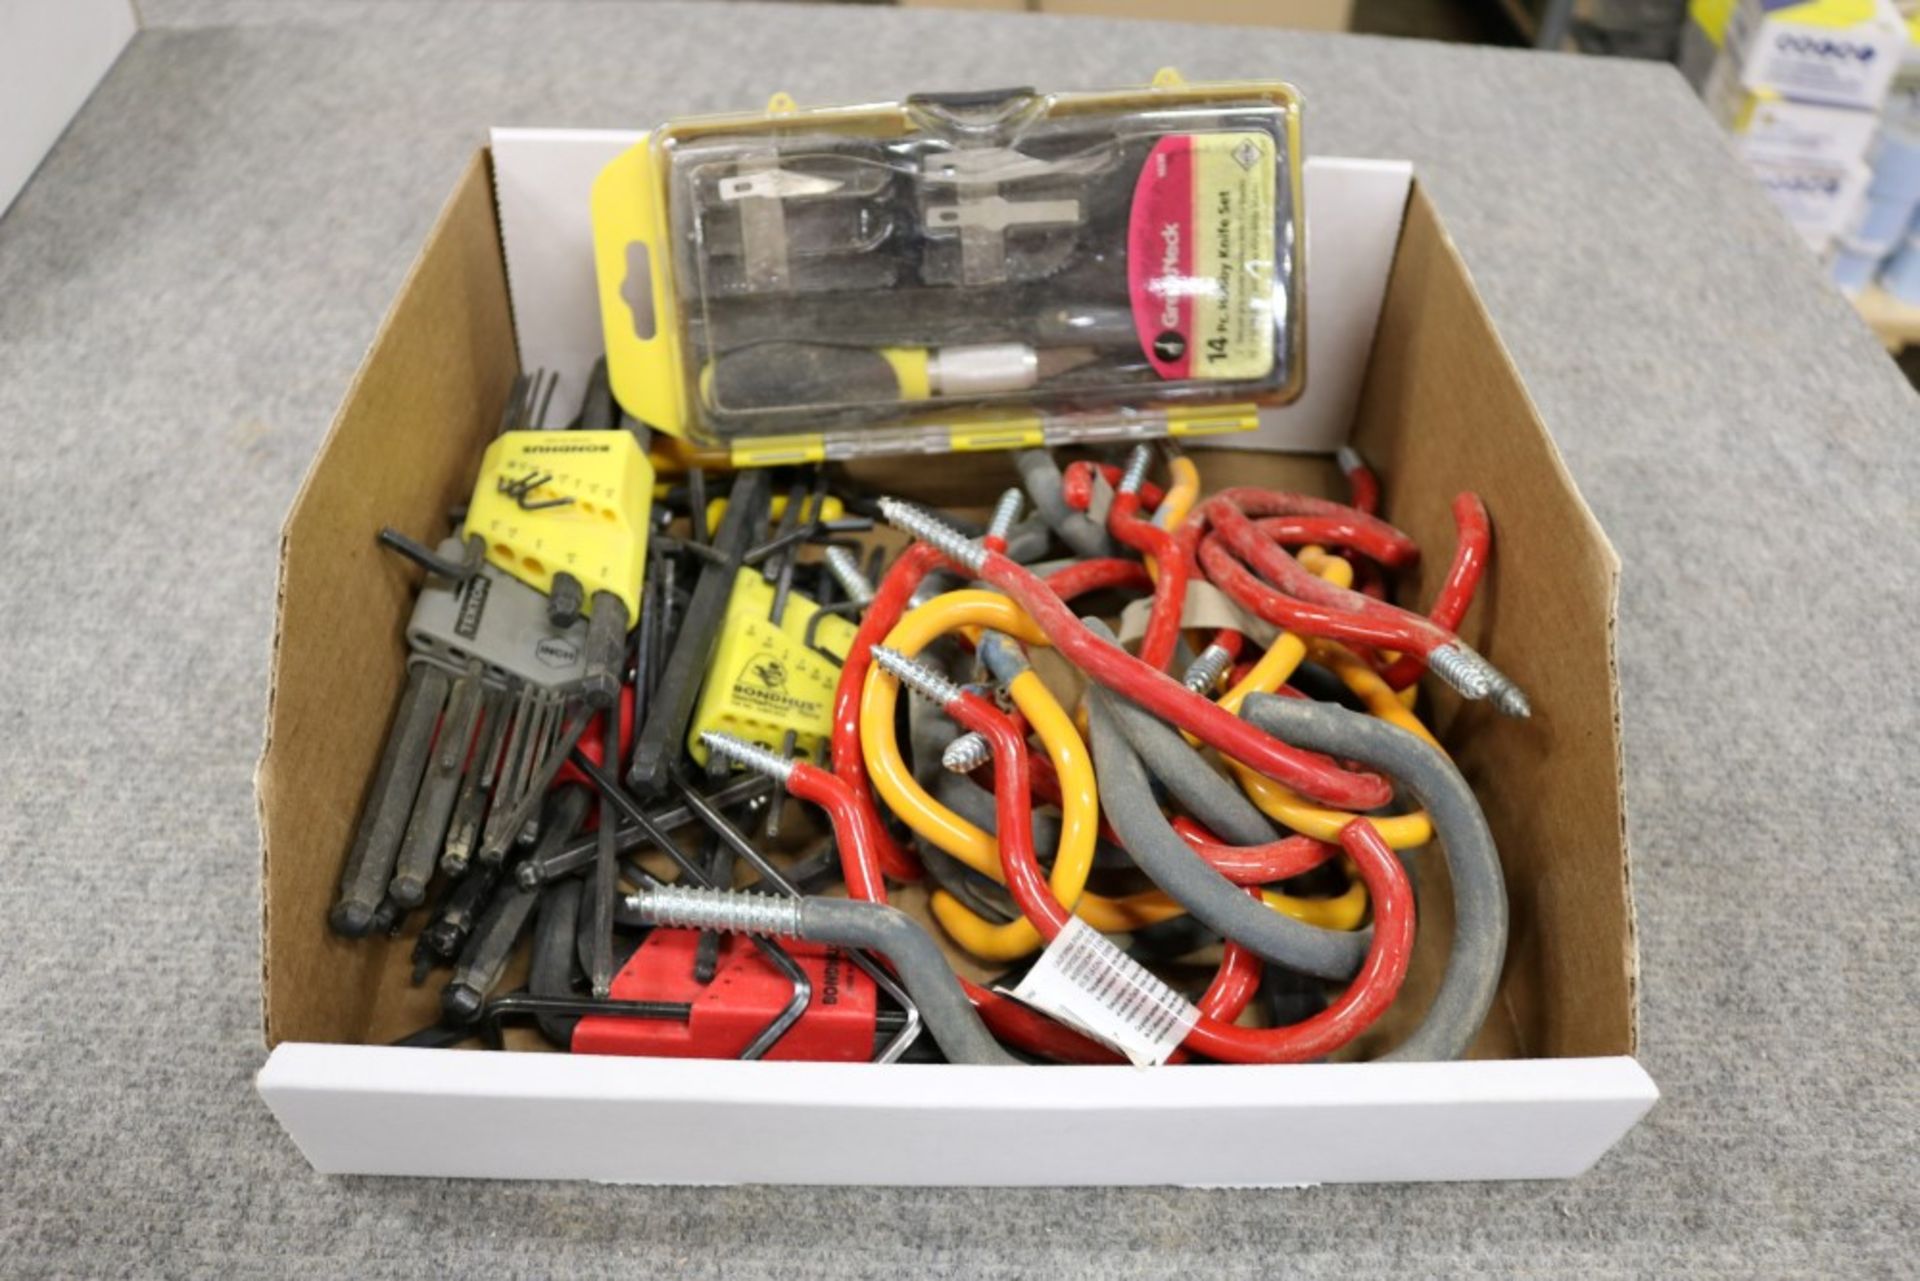 Box of Allen Keys, Shop Hooks, Crescent Wrench and Exacto Knife Kit - Image 2 of 6